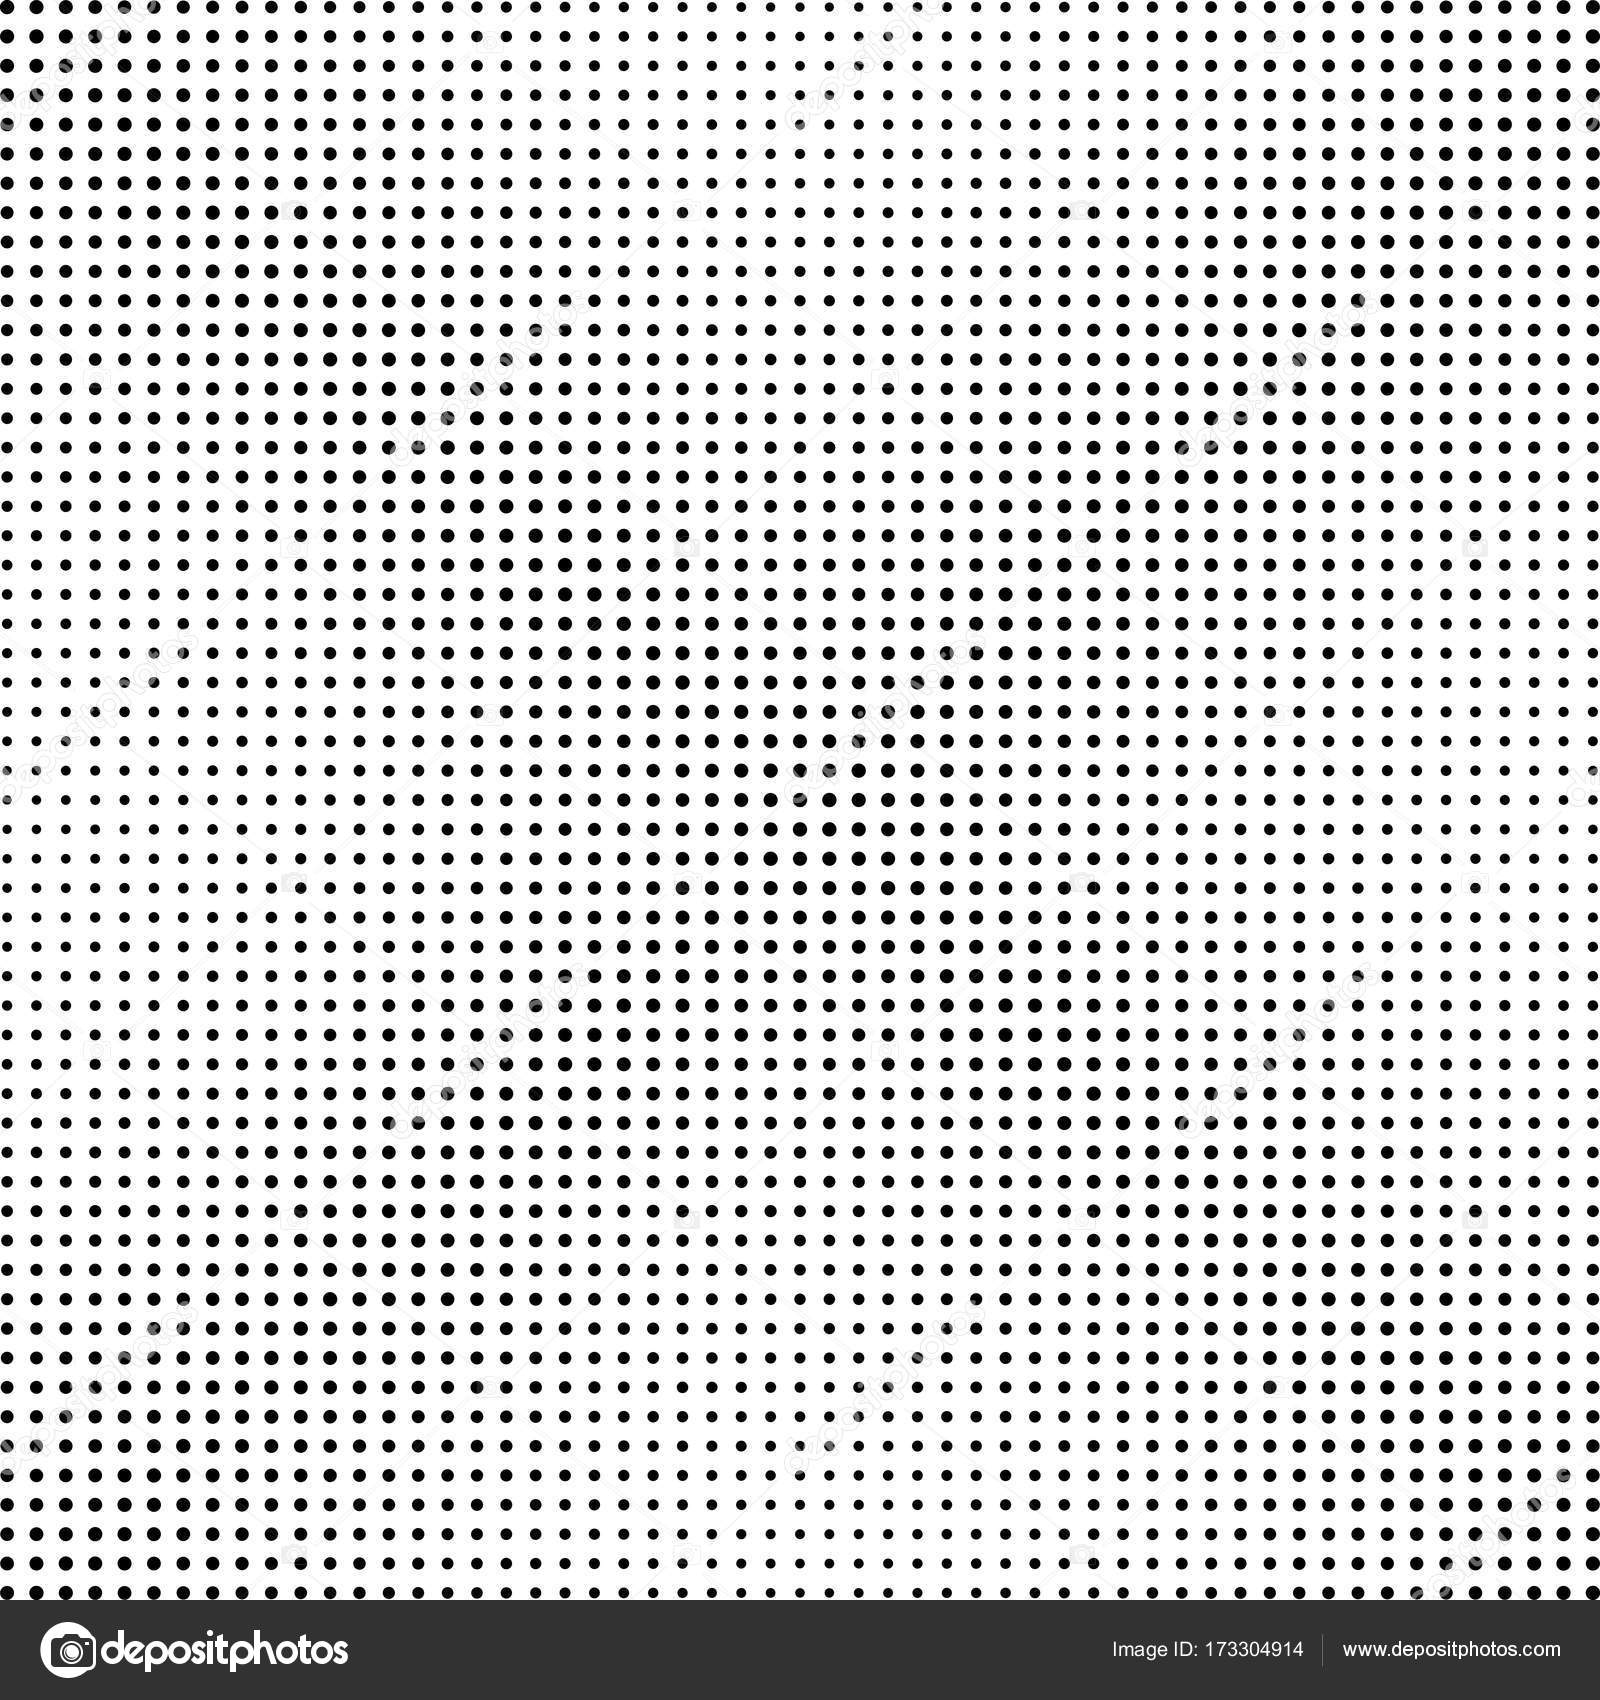 Halftone dotted background. Halftone effect vector pattern. Circle ...